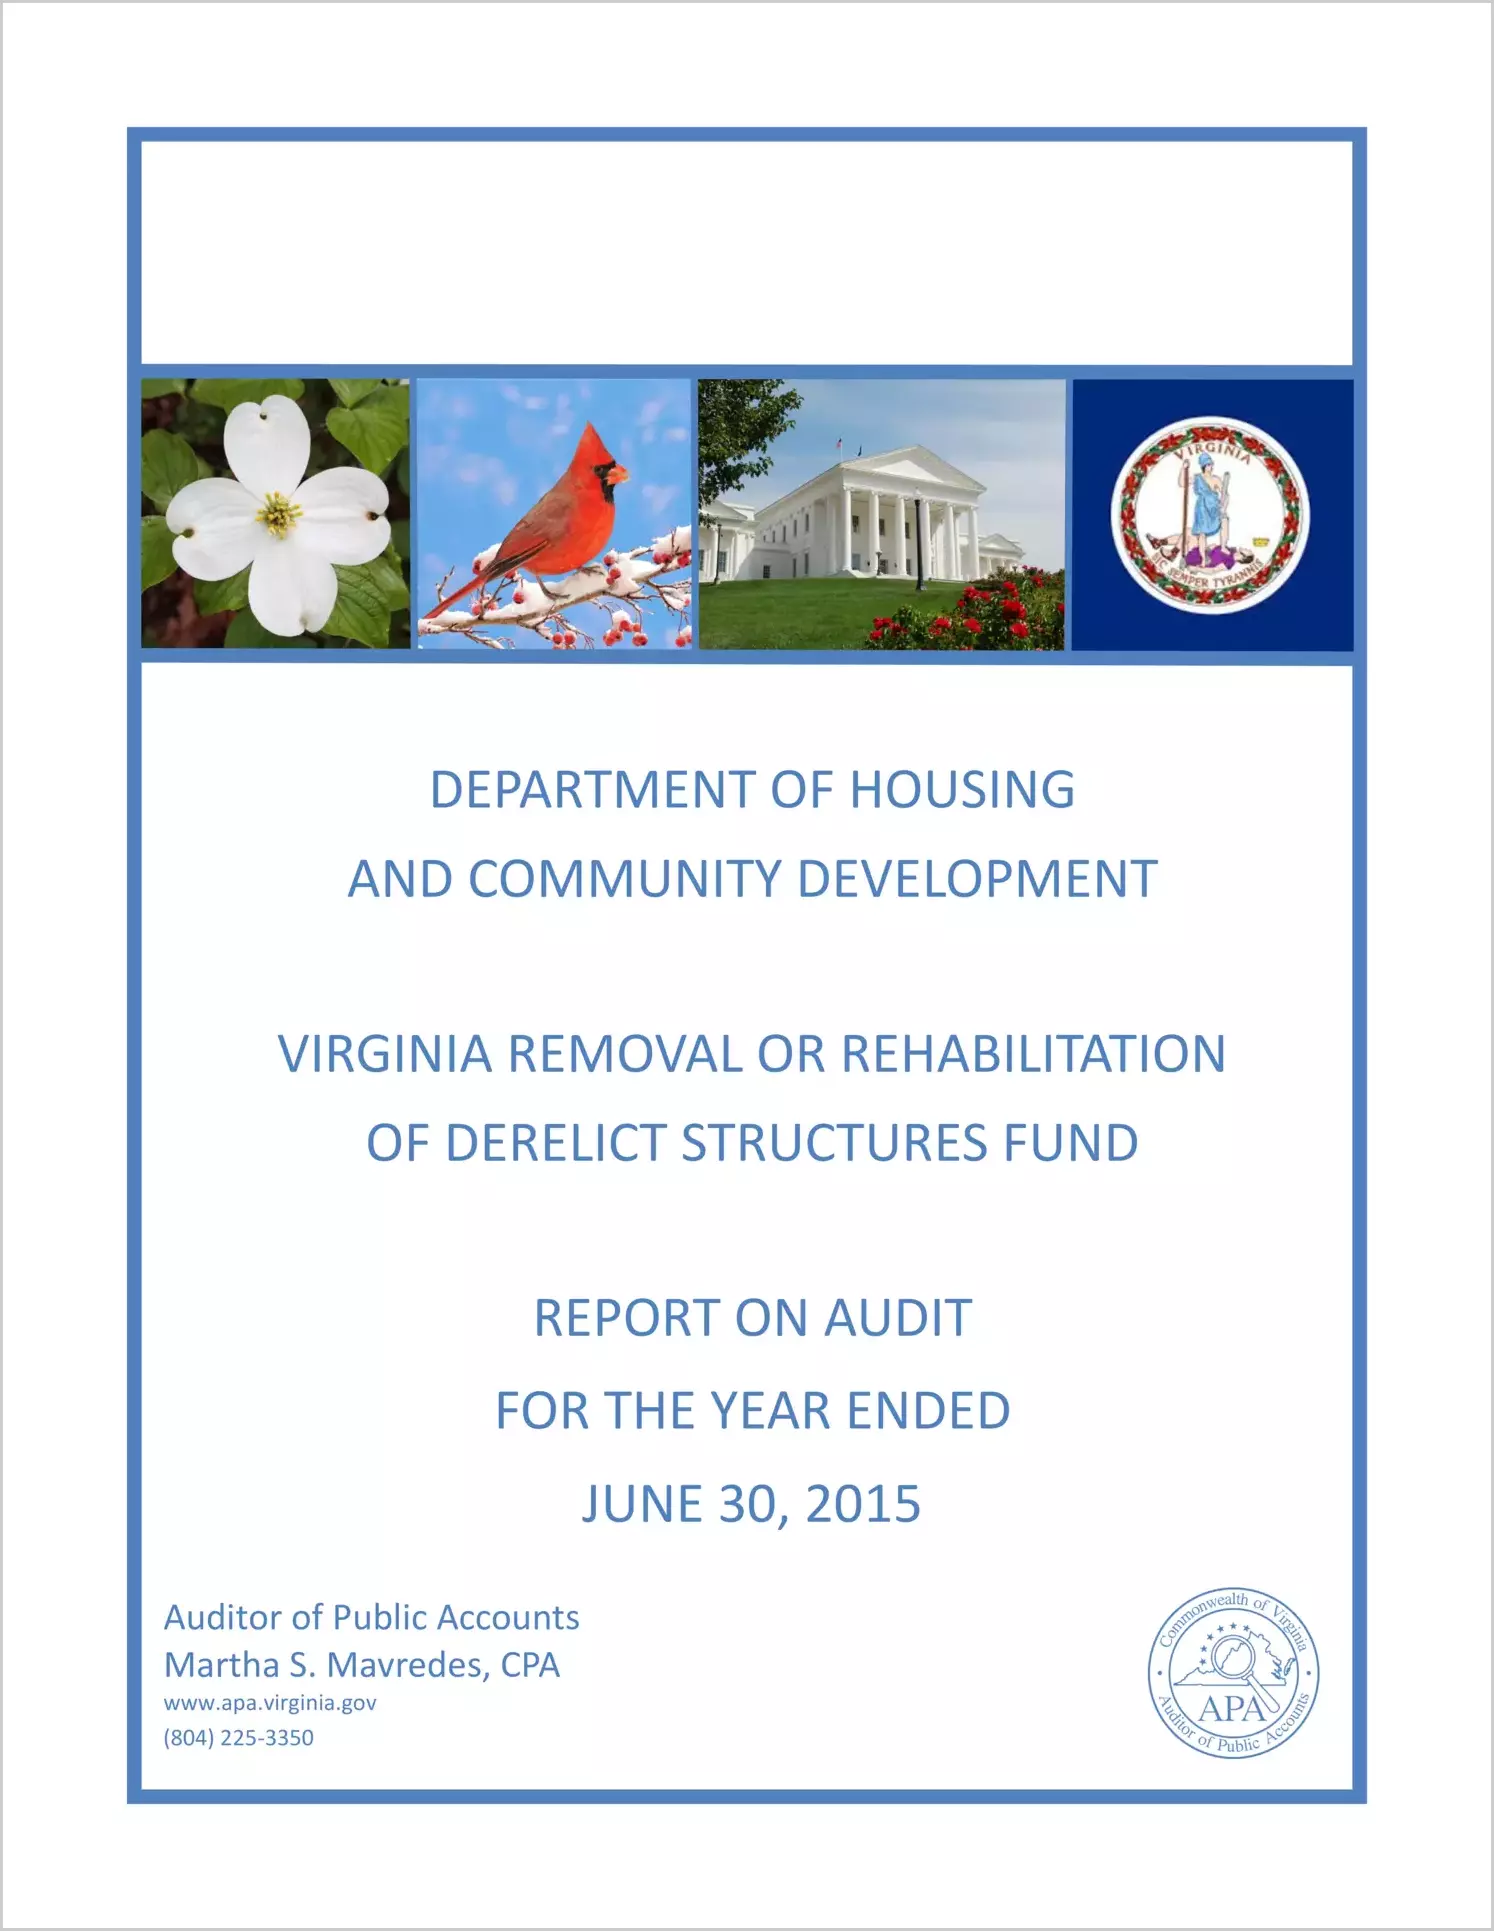 Department of Housing and Community Development - Virginia Removal or Rehabilitation of Derelict Structures Fund - Report on Audit for the year ended June 30, 2015